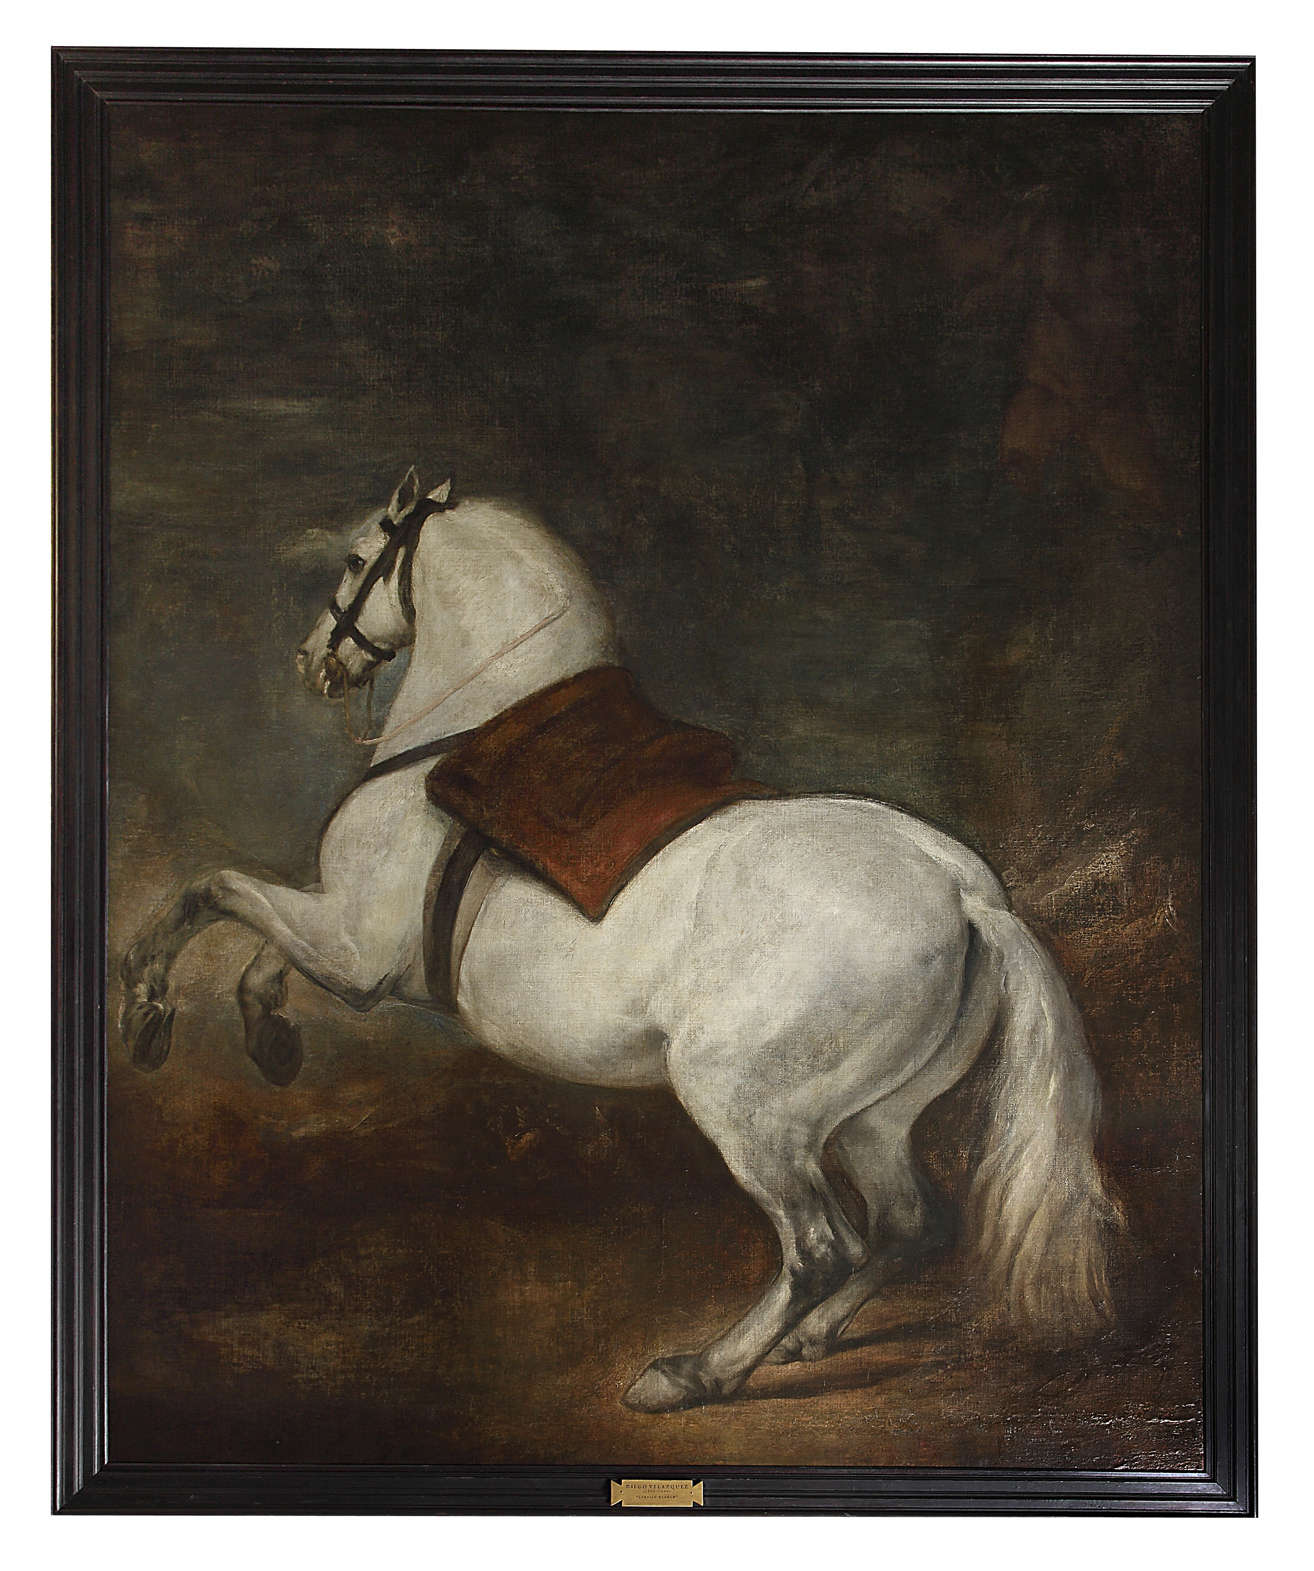 Diego Velázquez, White Horse (1634-1638; oil on canvas, 310 x 246 cm; Madrid, Royal Collections Gallery)